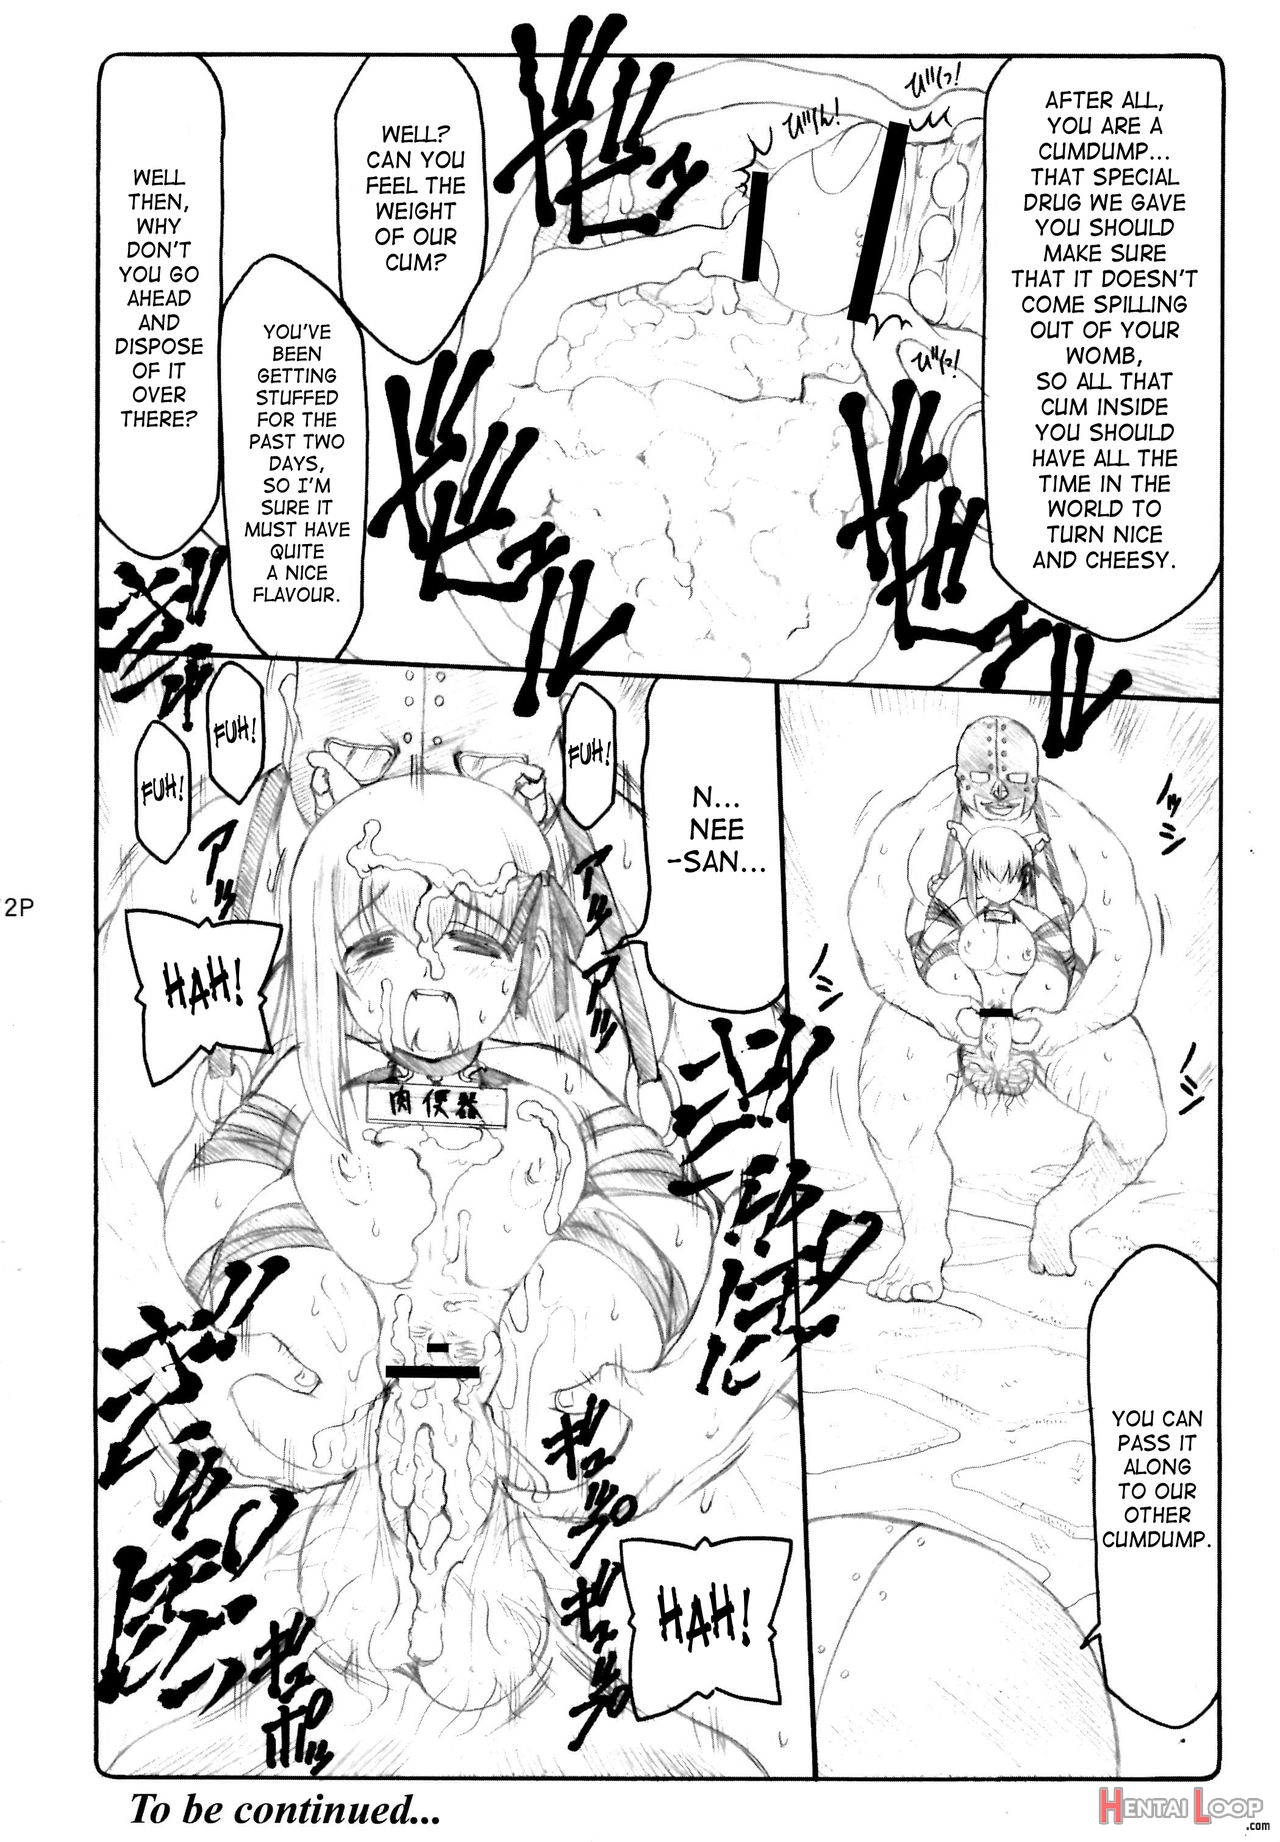 Kotori 4 & 6 Extra Pages page 4